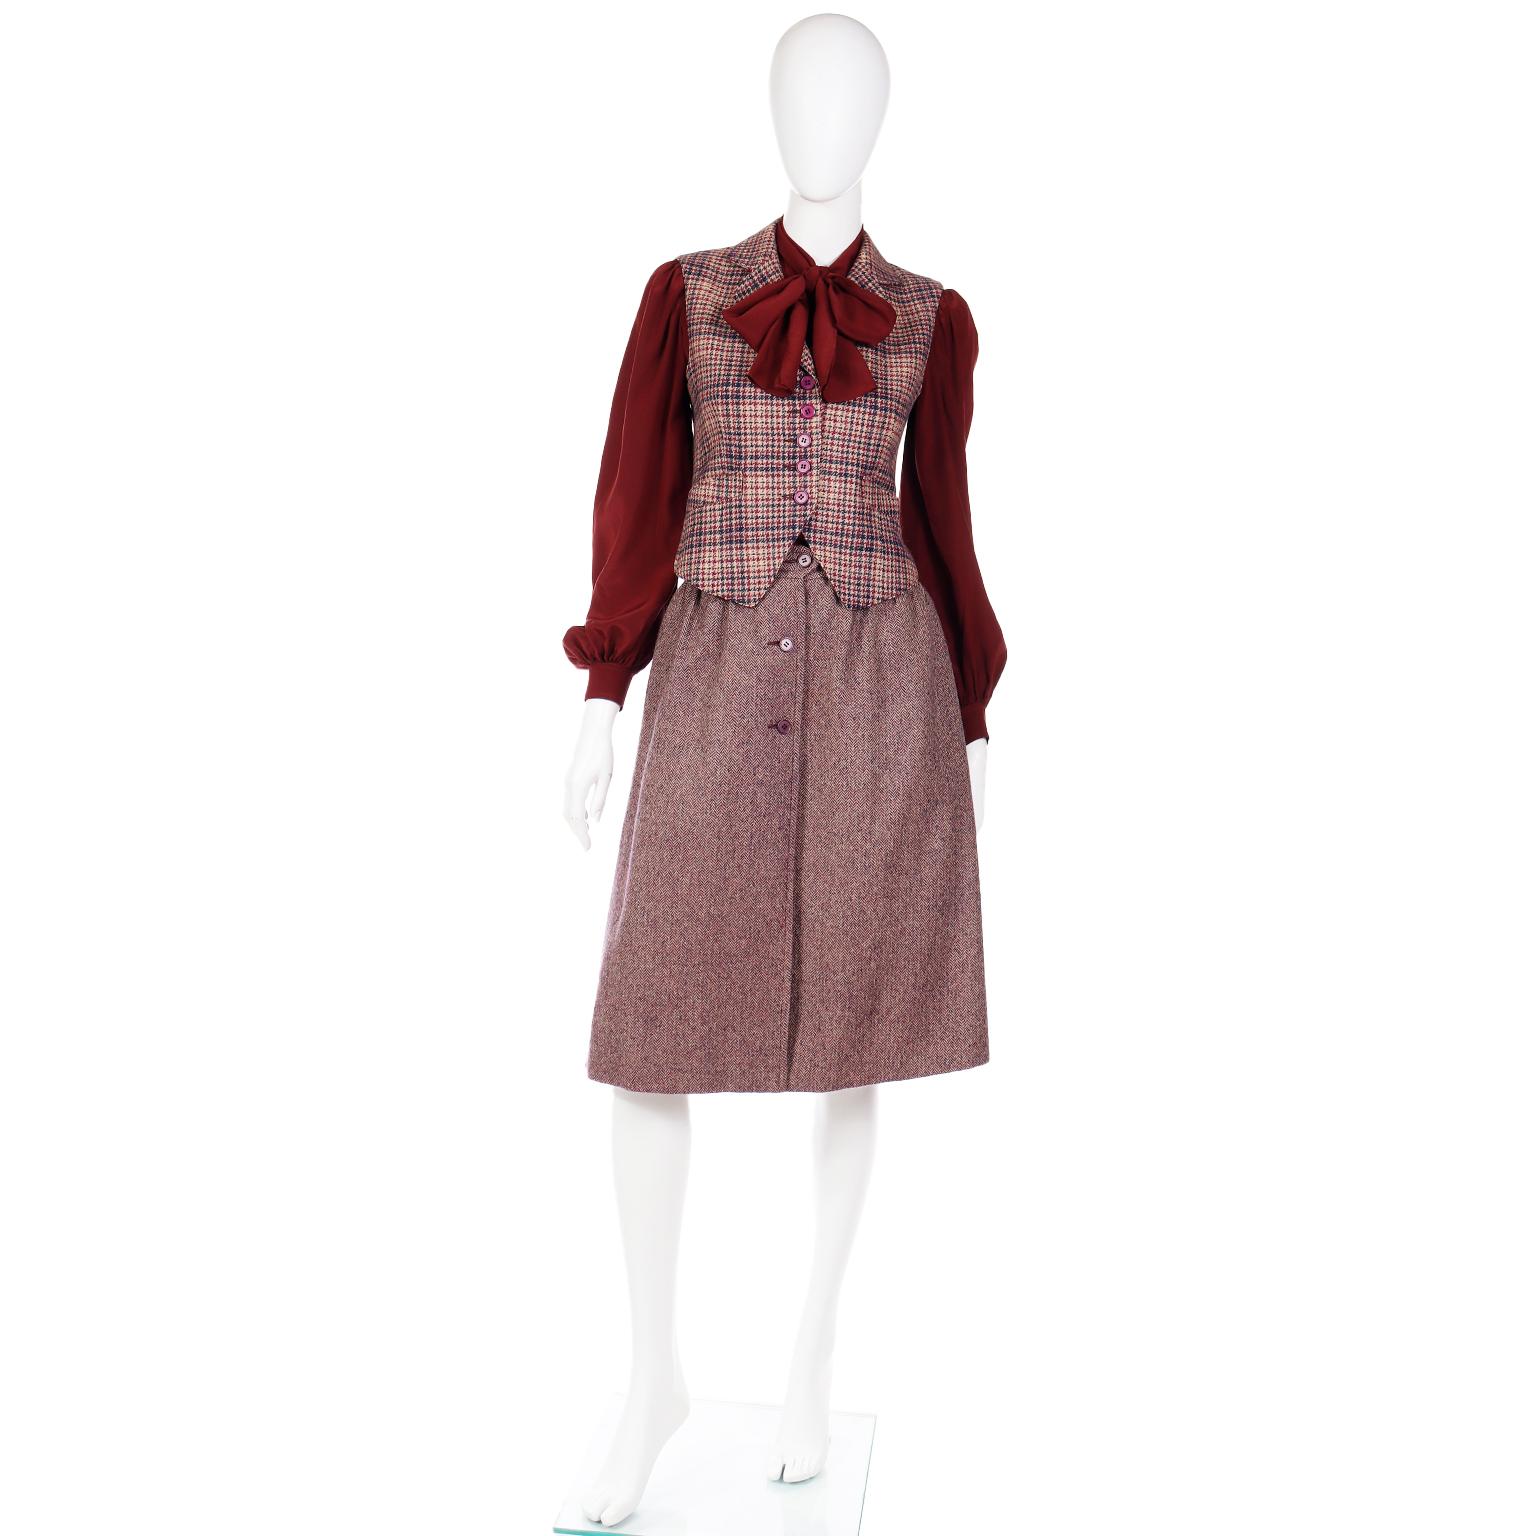 This is a very rare vintage Jean Patou Boutique 3 piece burgundy wool plaid ensemble that includes a vest, bow silk blouse and culotte skirt. We love the unique way the culottes are designed with shorts and a wrap around skirt. We've tried to show